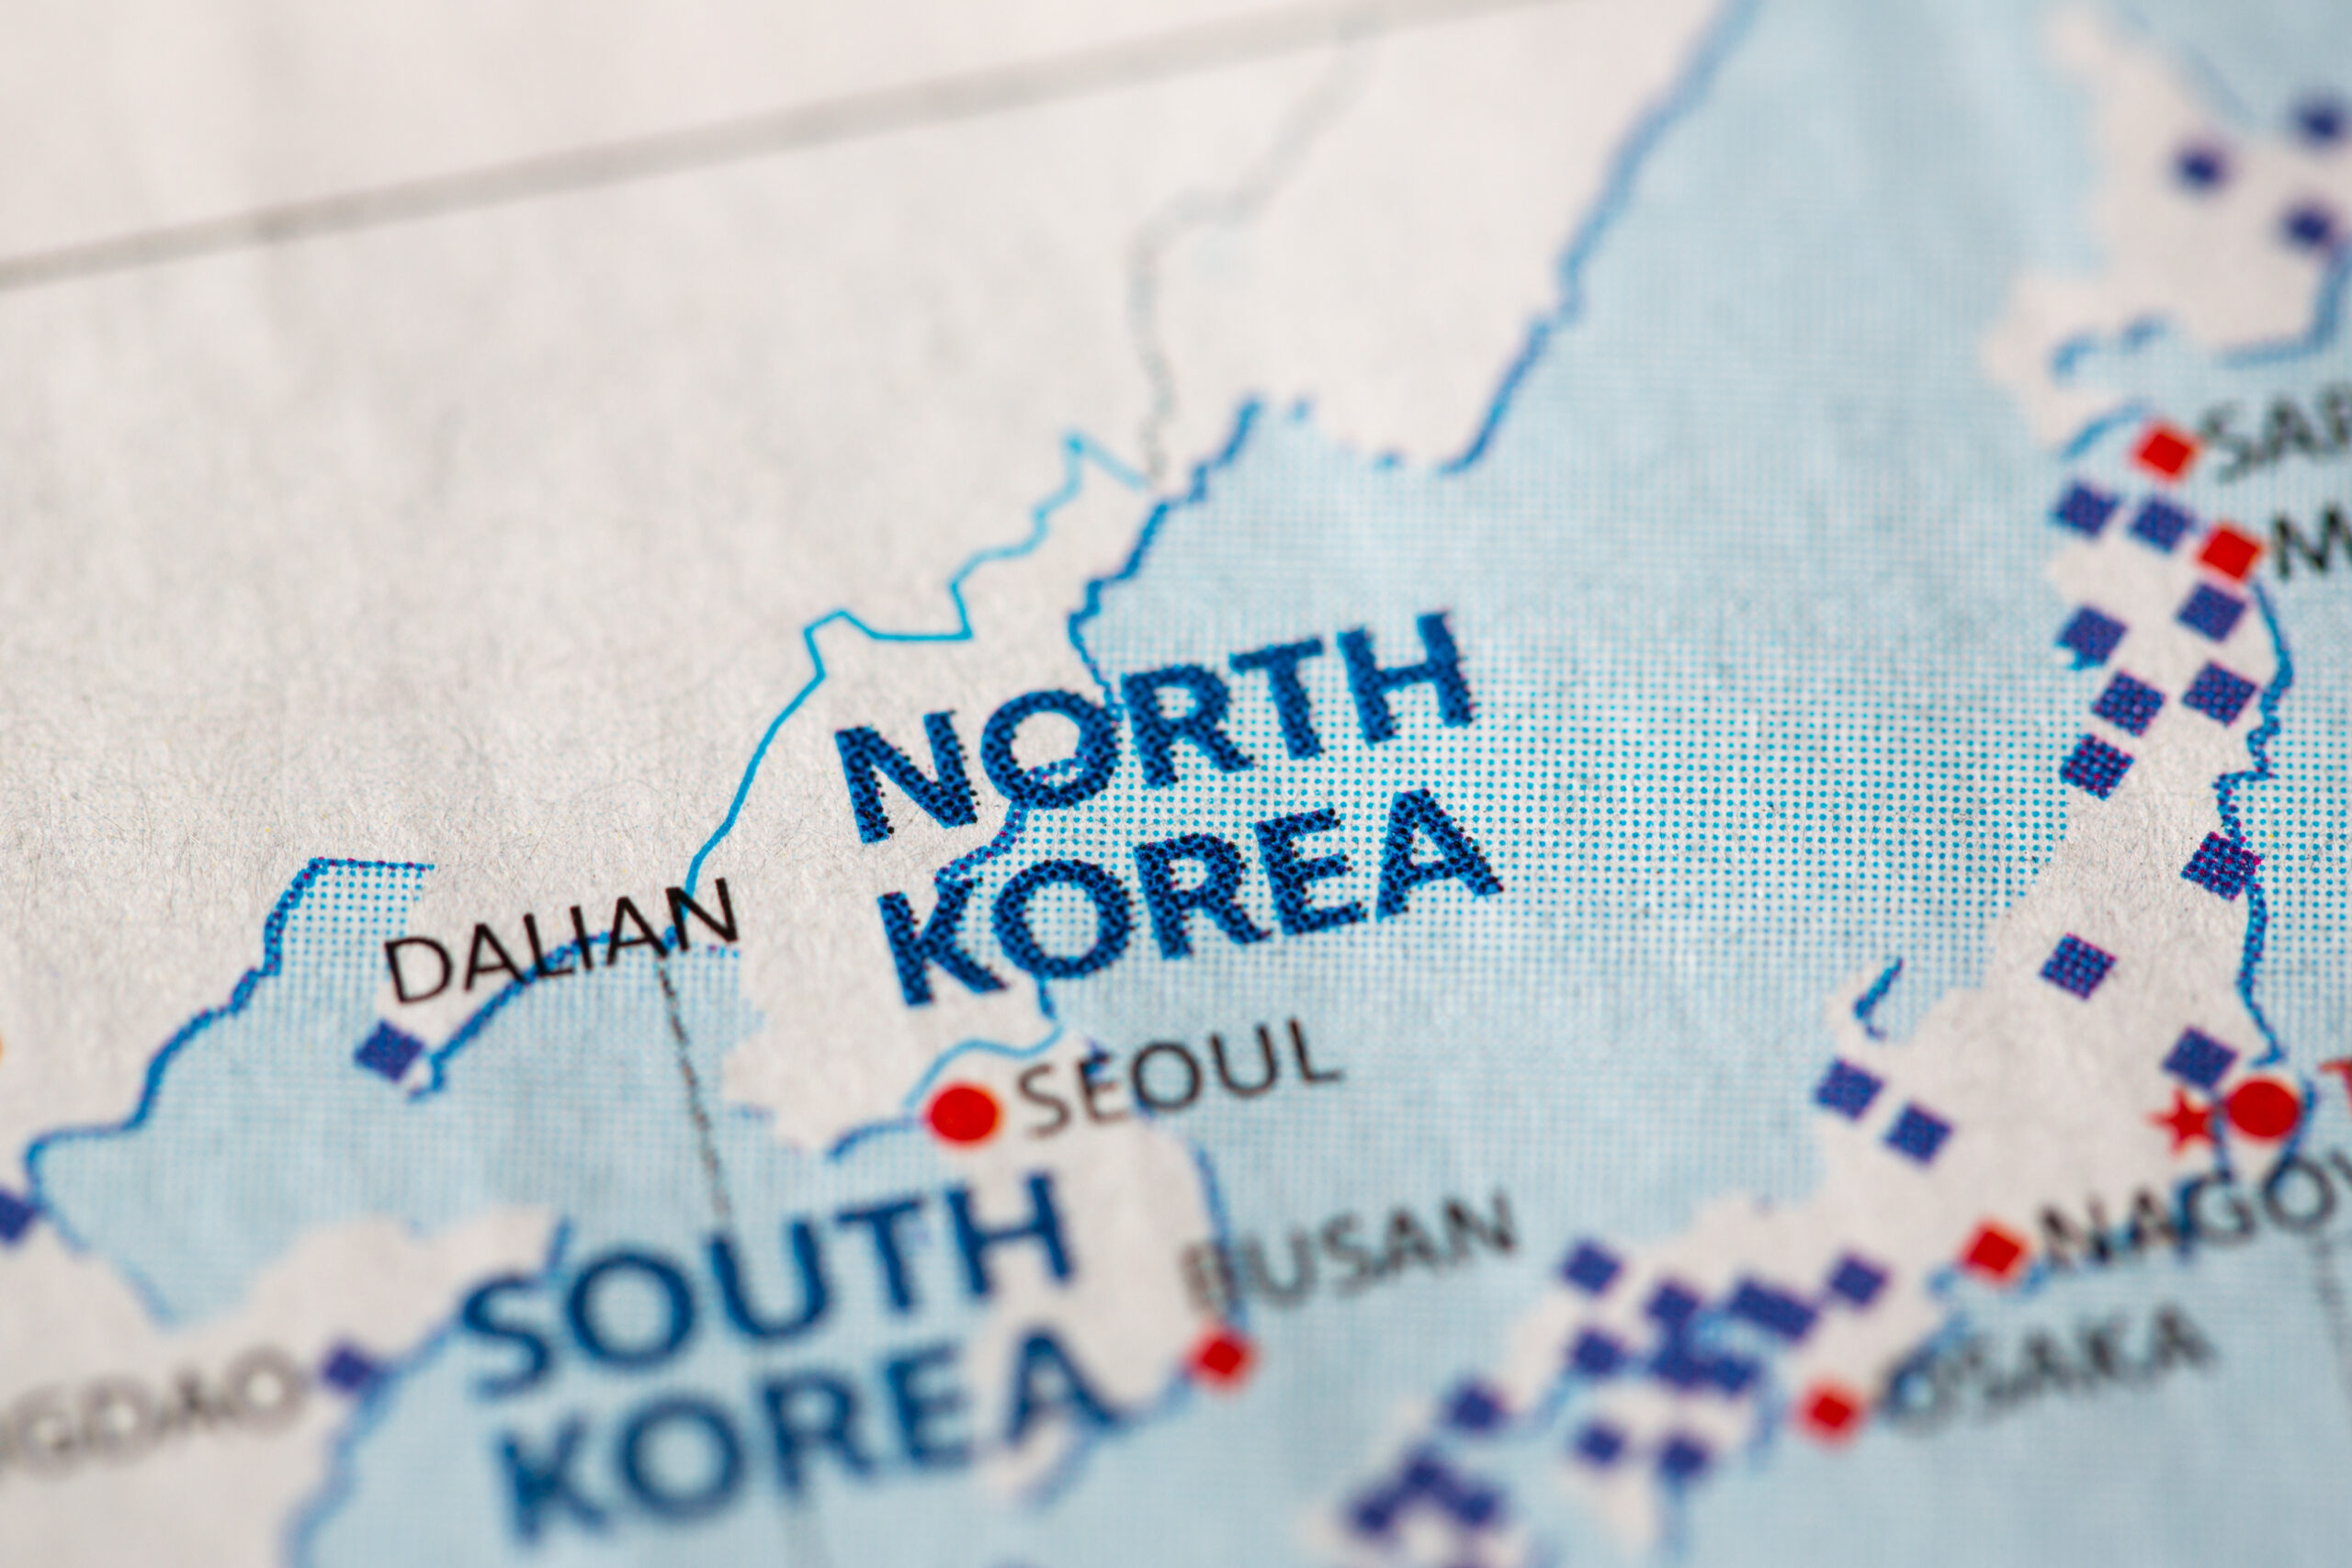 <p><span>South Korea’s final ODA budget for 2023 was confirmed as KRW 4.78 trillion (approximately $3.7 billion). This budget represents a 6% increase over the initial proposal of KRW 4.5 trillion and a 21.3% increase over the 2022 budget of KRW 4.04 trillion.</span></p>